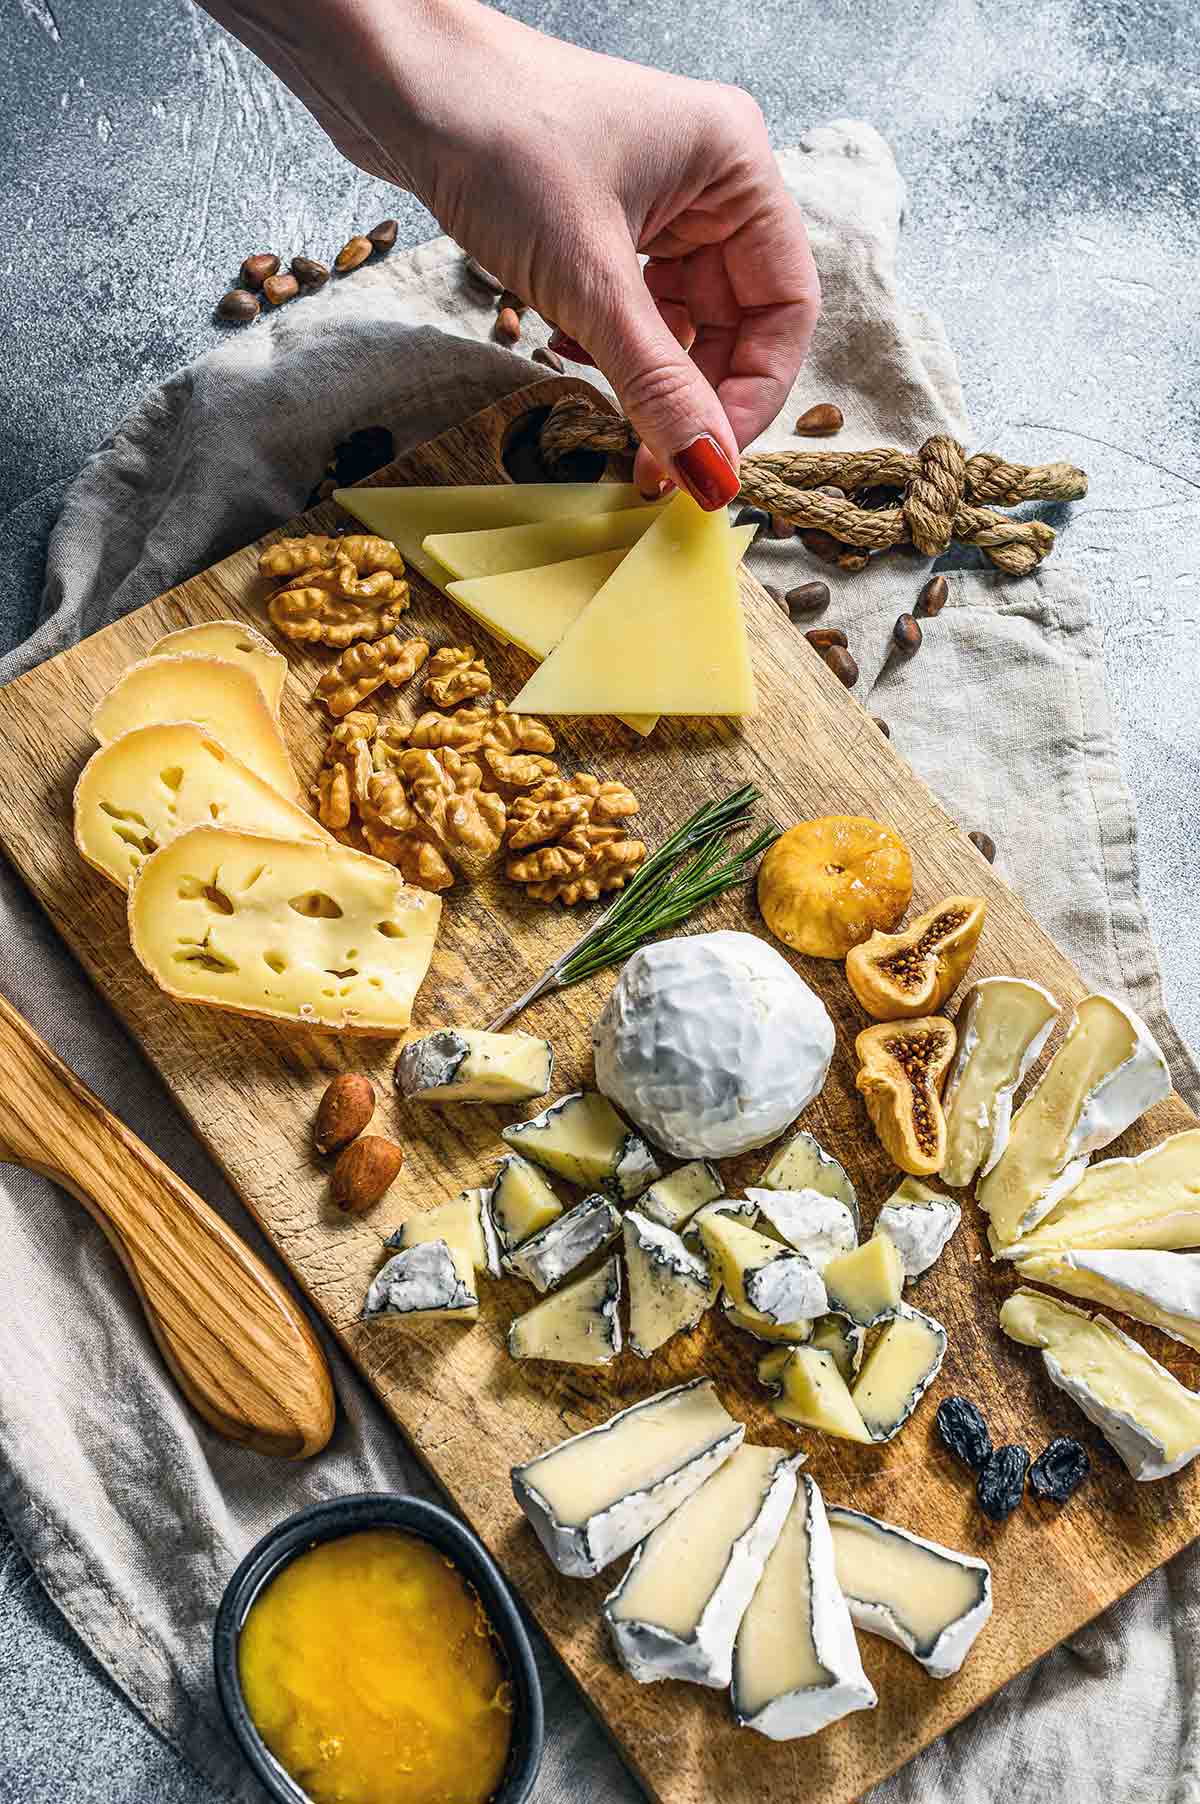 Various cheeses and nuts on a wooden cutting board, with a woman's hand picking up a triangle of cheese.